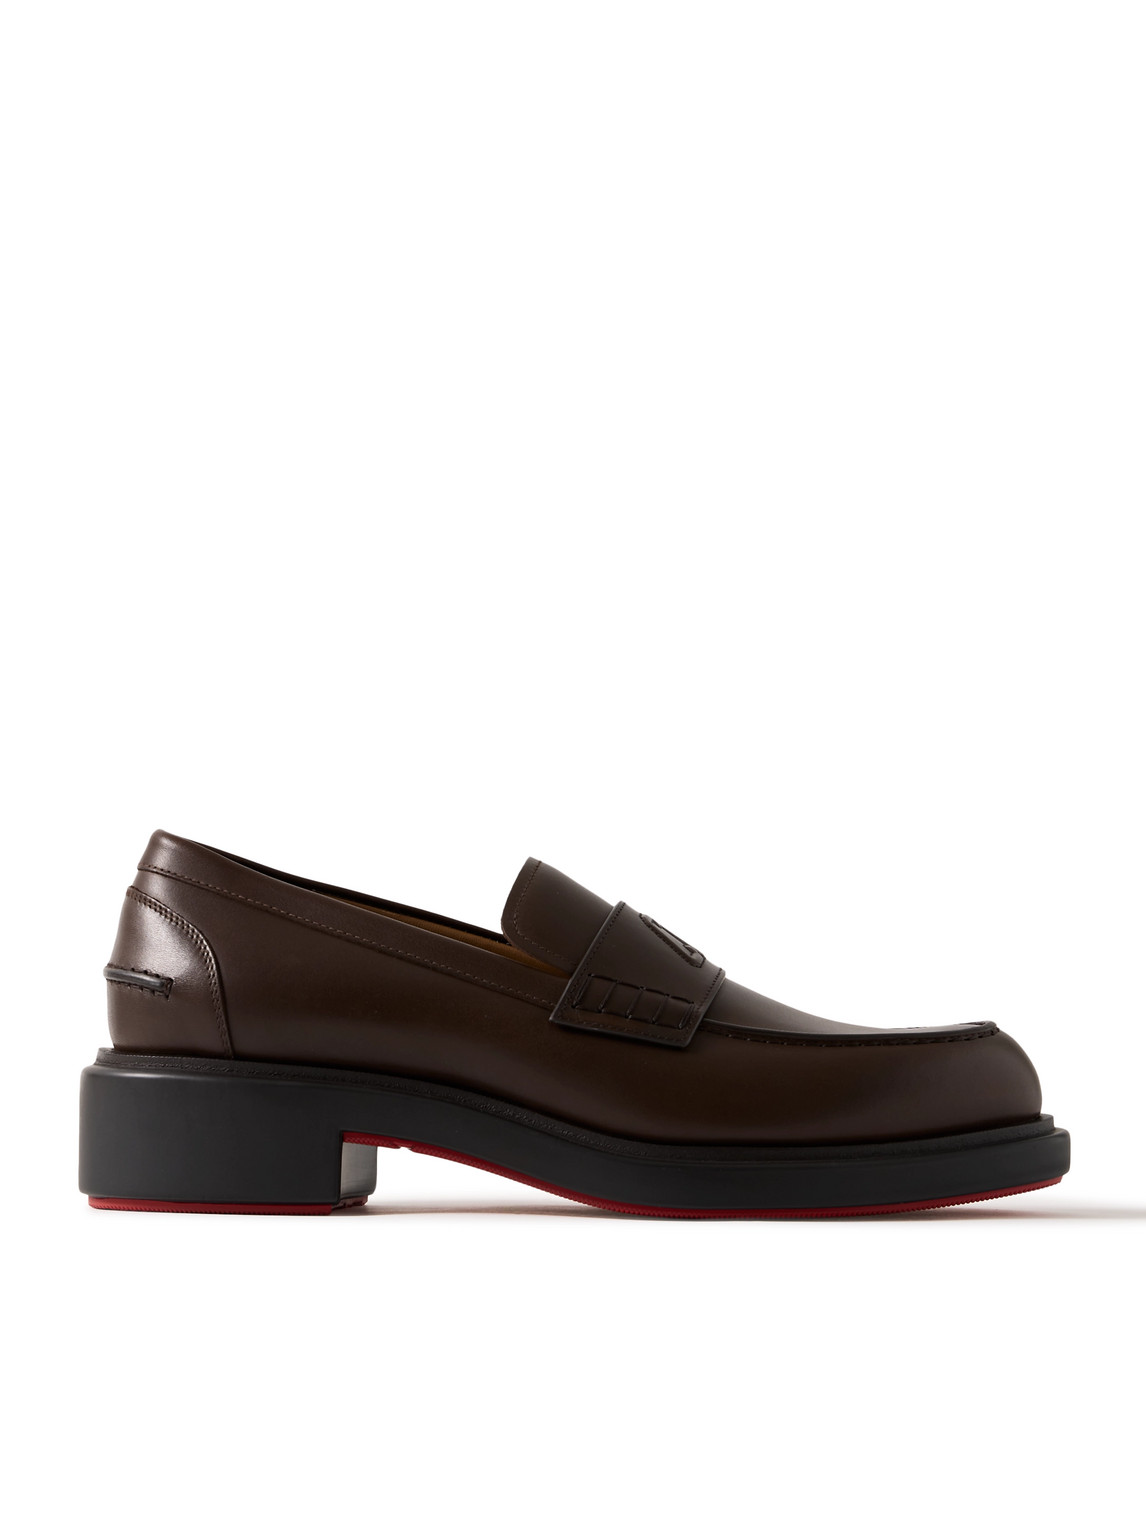 Urbino Moc Leather Penny Loafers